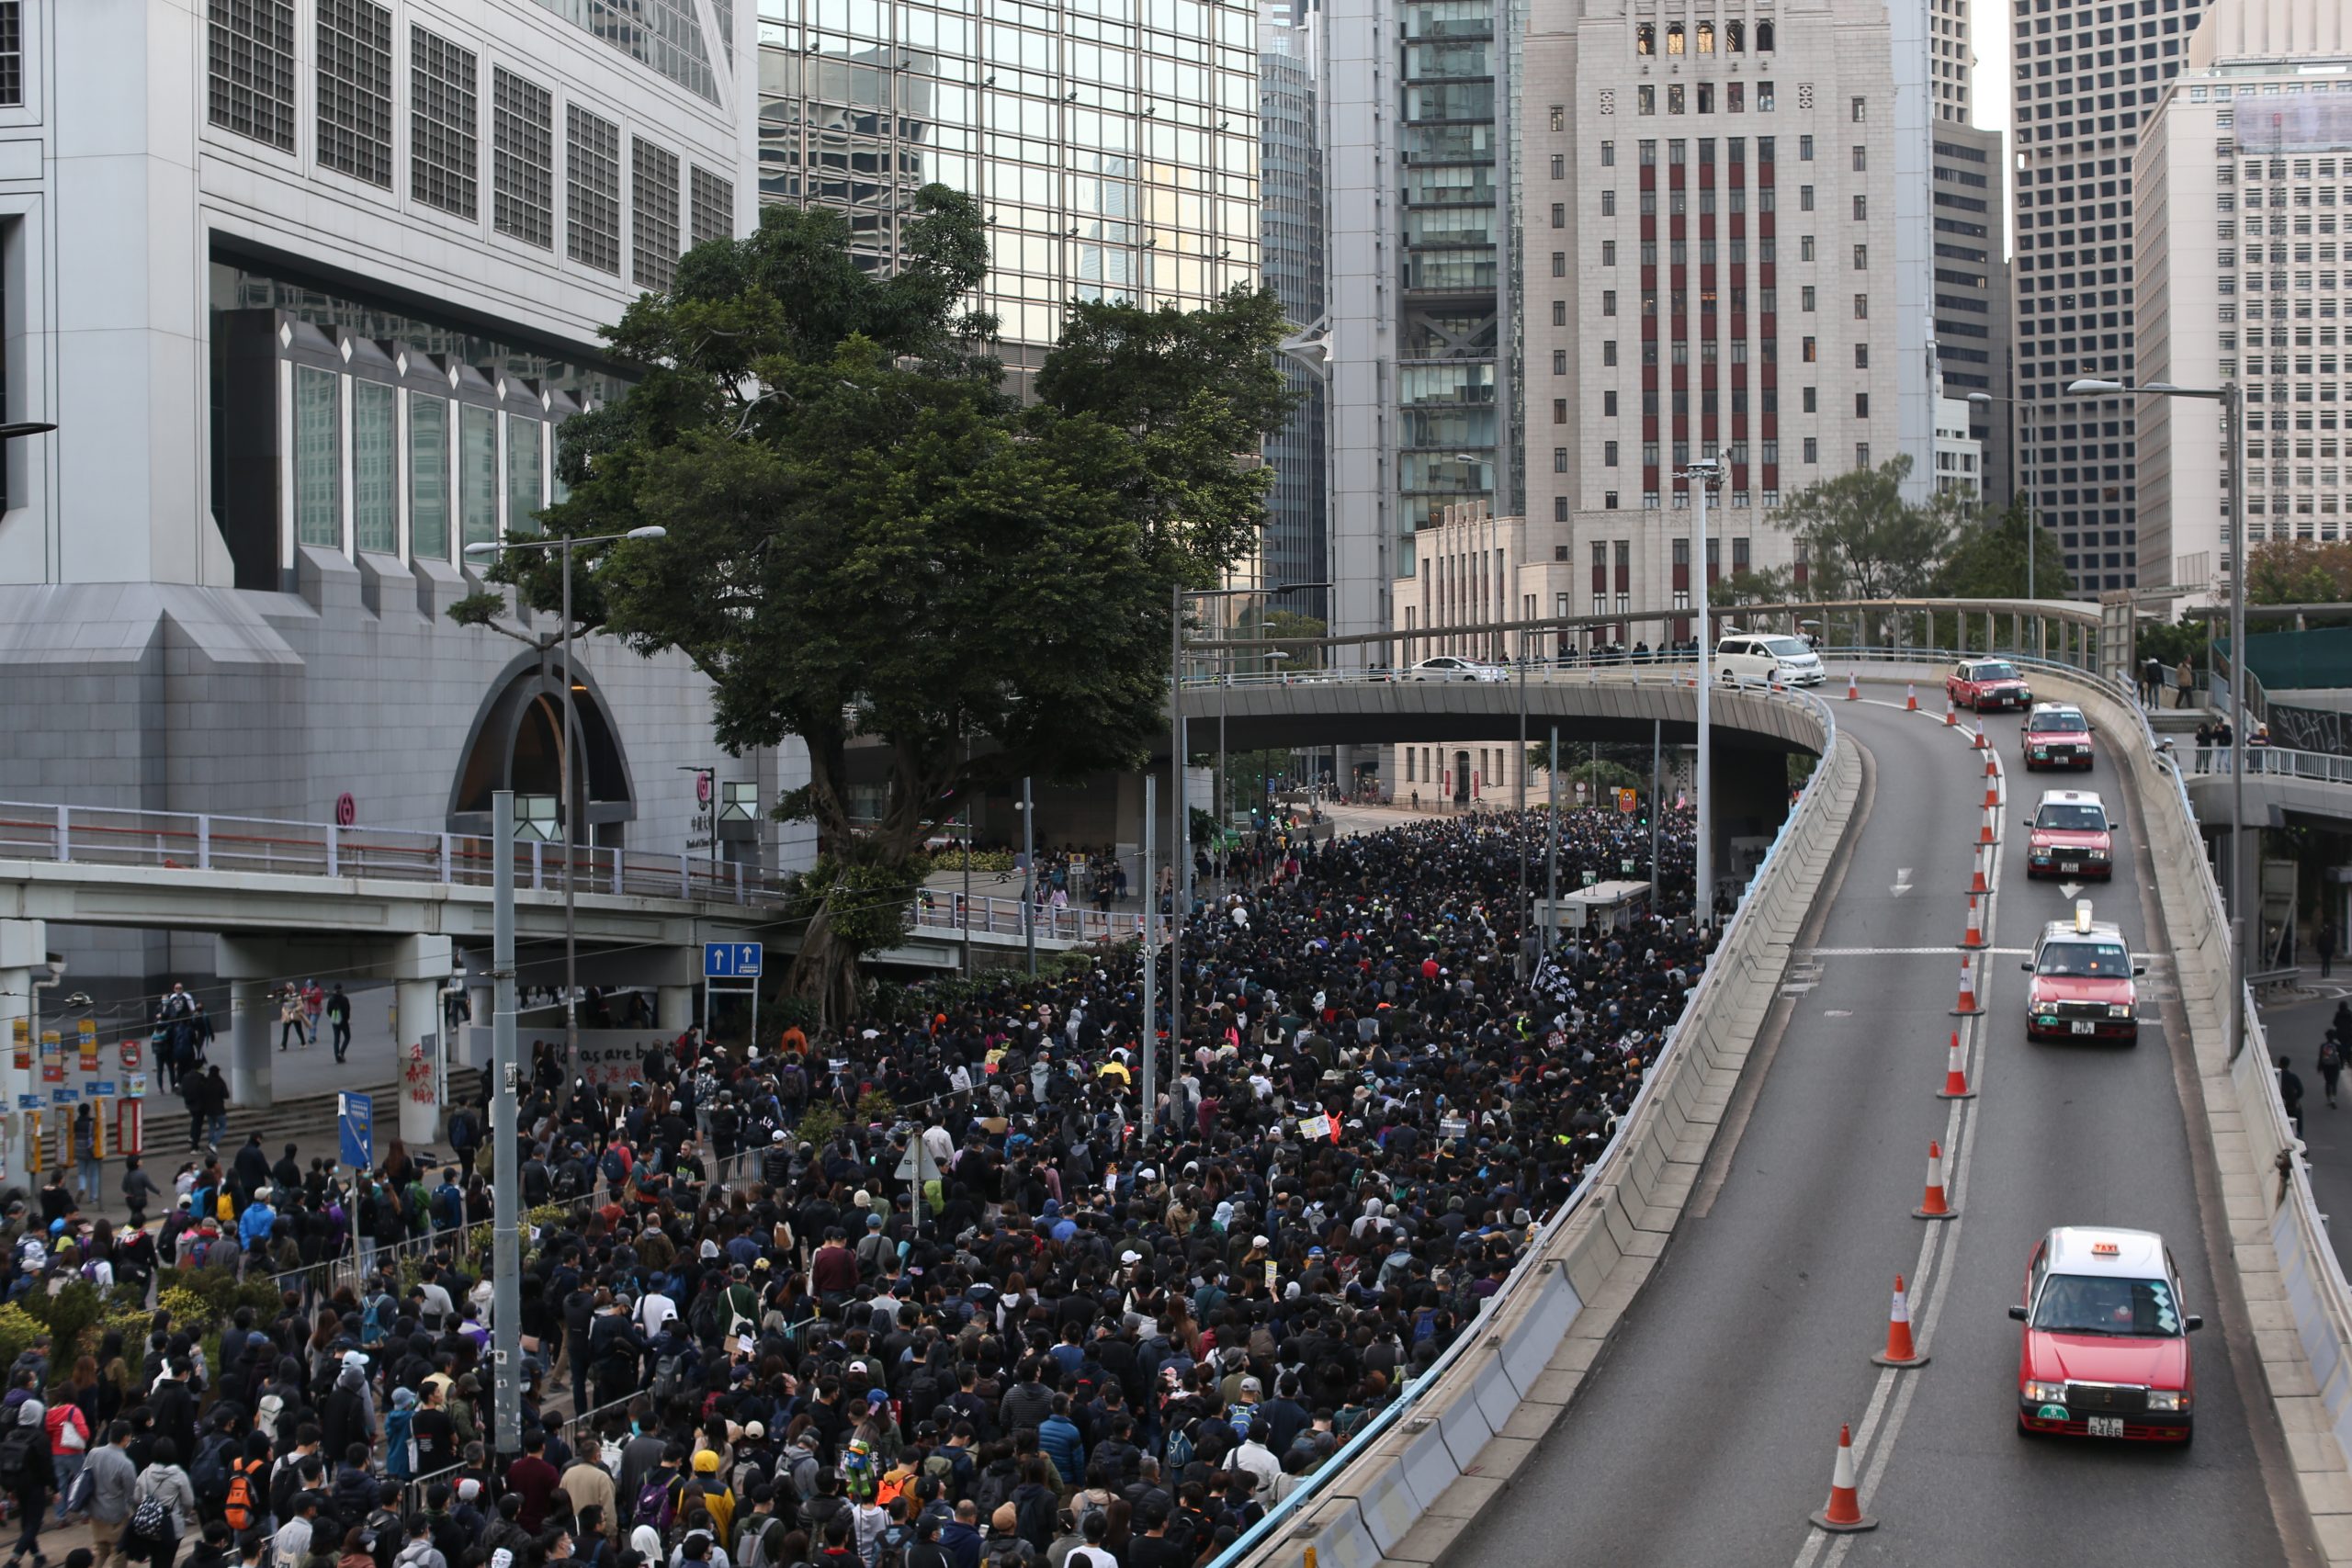 epa08054232 Cars drive by as Hong Kong's pro-democracy protesters (L) take part in a rally organized by the Civil Human Rights Front ahead of the upcoming Human Rights Day, in Hong Kong, China, 08 December 2019. Human Rights Day is celebrated annually across the world on 10 December. Hong Kong is in its sixth month of mass protests, which were originally triggered by a now withdrawn extradition bill, and have since turned into a wider pro-democracy movement.  EPA/JEROME FAVRE